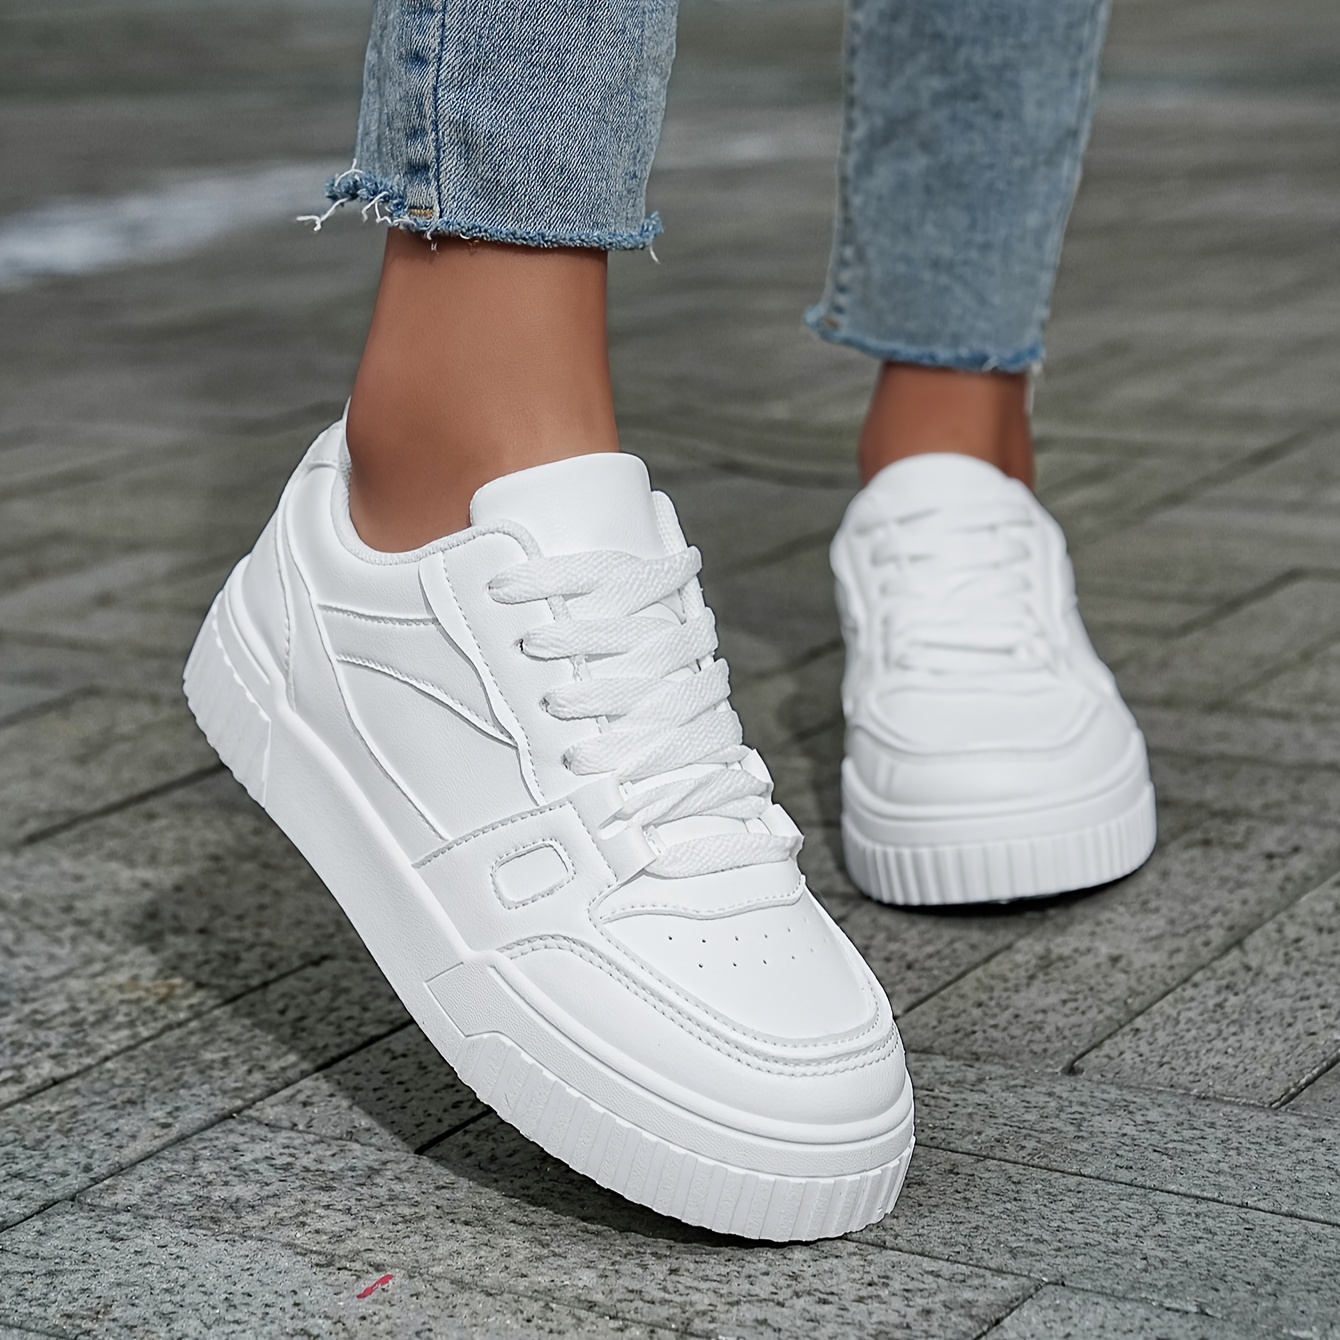 

Women's White Skate Shoes, Versatile Low Top Flatform Sneakers, Casual Outdoor Walking Sports Shoes